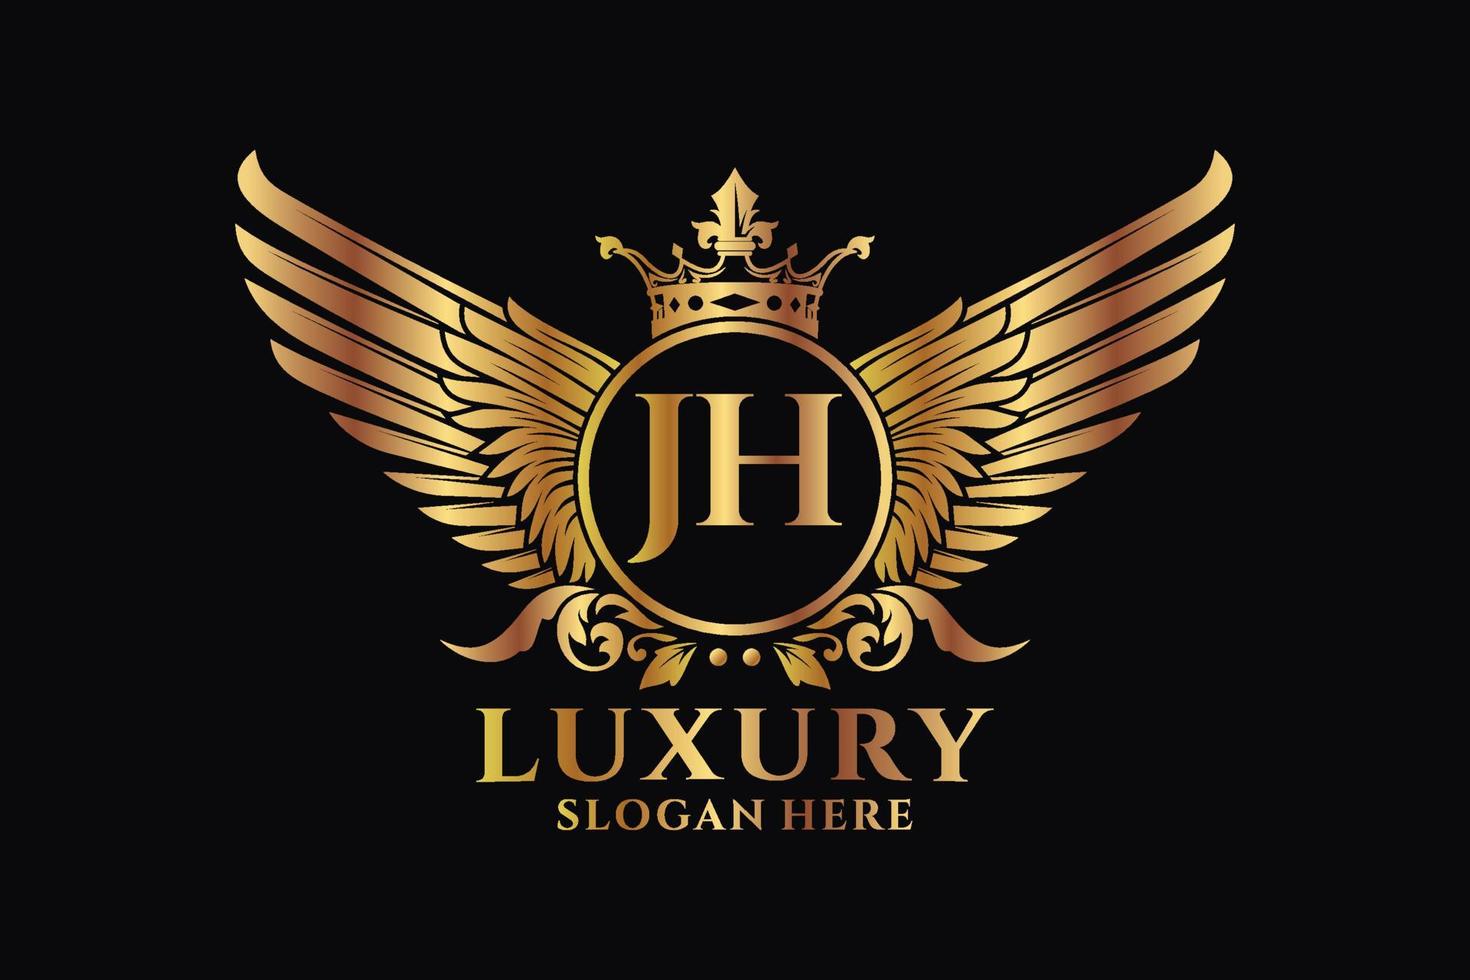 Luxury royal wing Letter JH crest Gold color Logo vector, Victory logo, crest logo, wing logo, vector logo template.